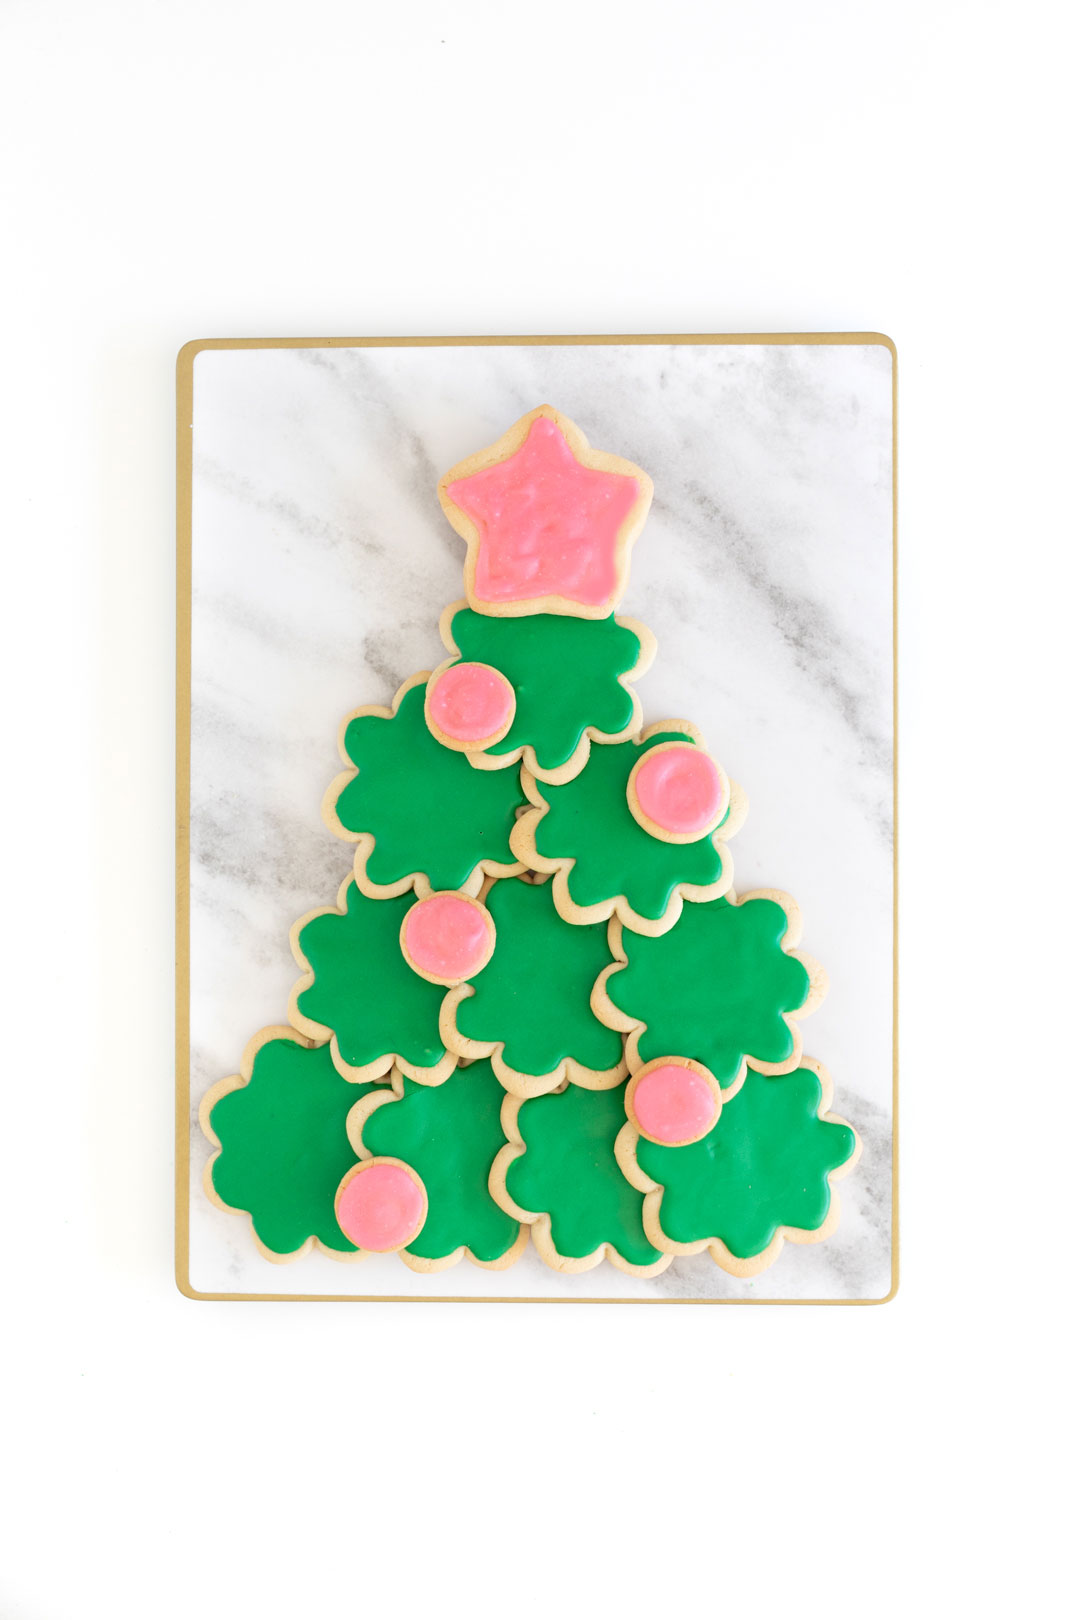 christmas tree made out of sugar cookies using a flower cookie cutter and a star cookie cutter for the tree topper. 